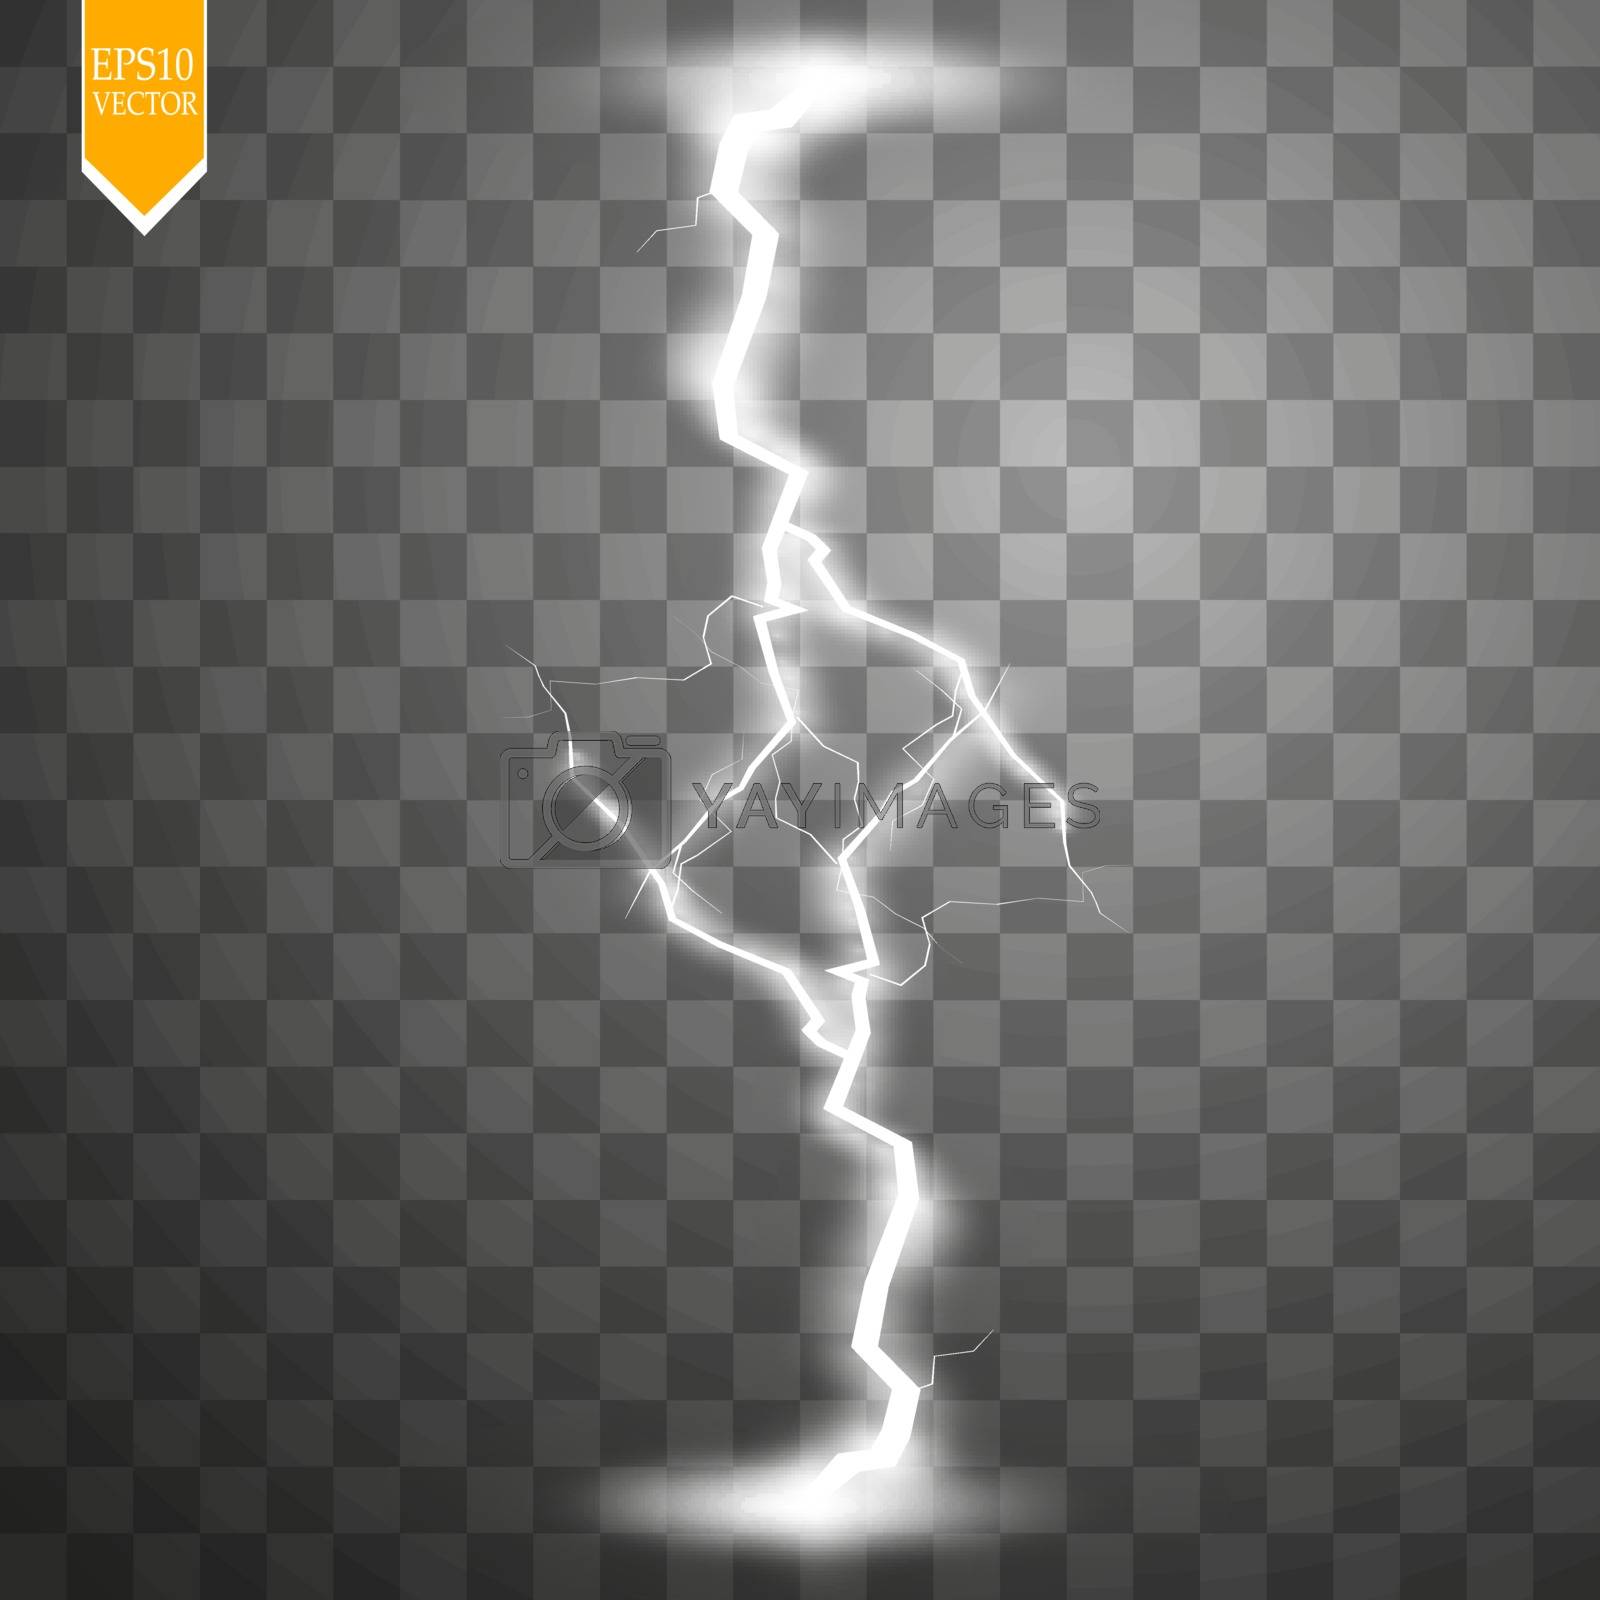 Royalty free image of Vector illustration.Transparent light effect of electric lightning.The indomitable power of natural energy by Denzelll